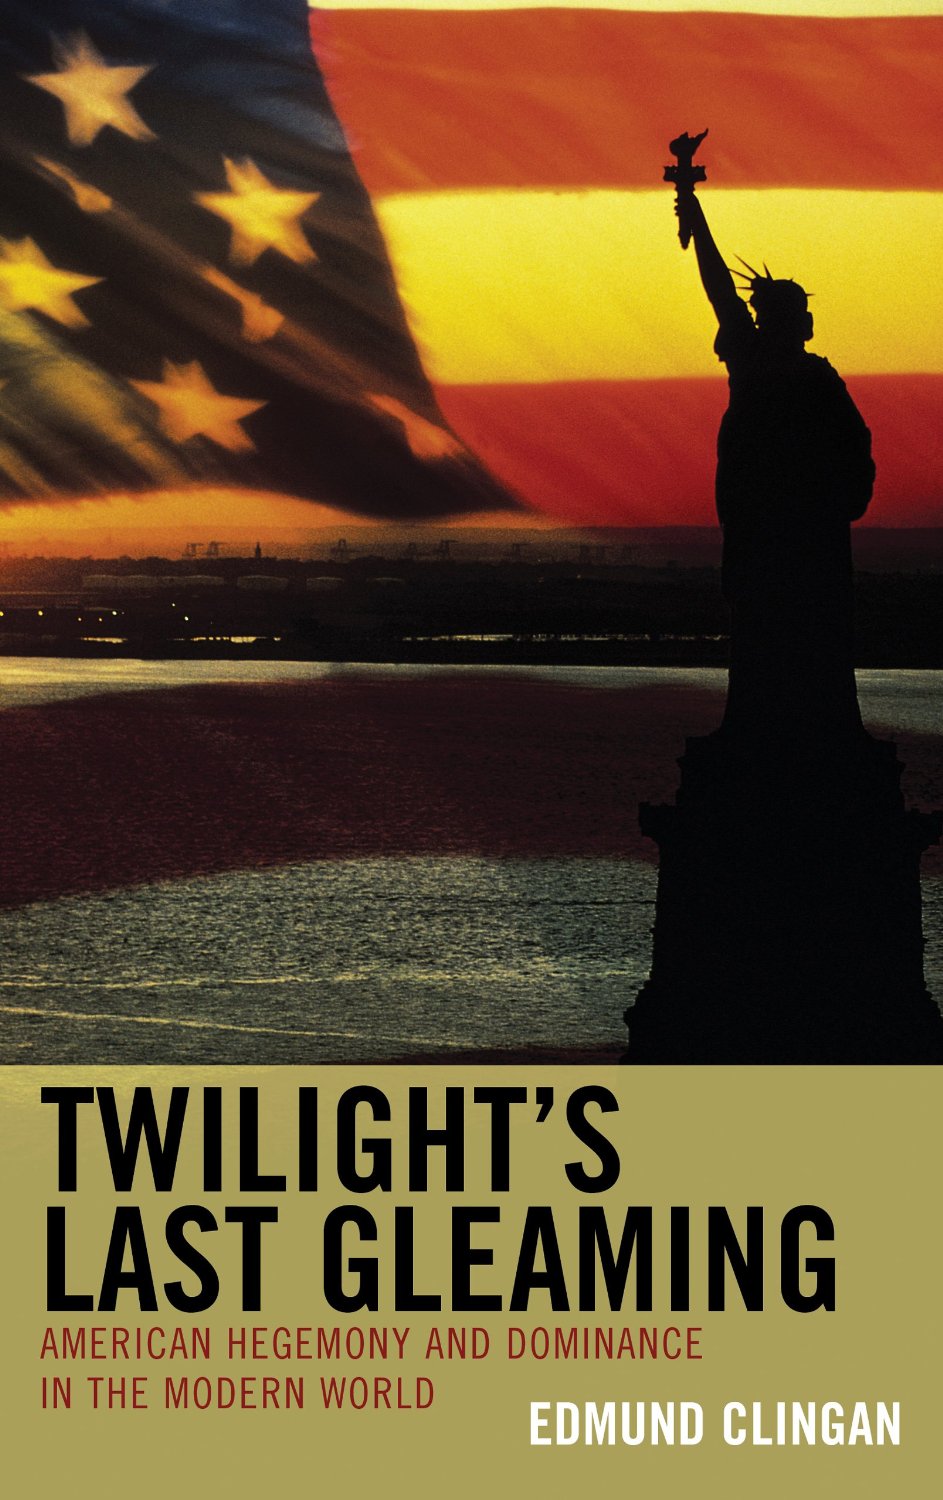 "Twilight's Last Gleaming" book cover